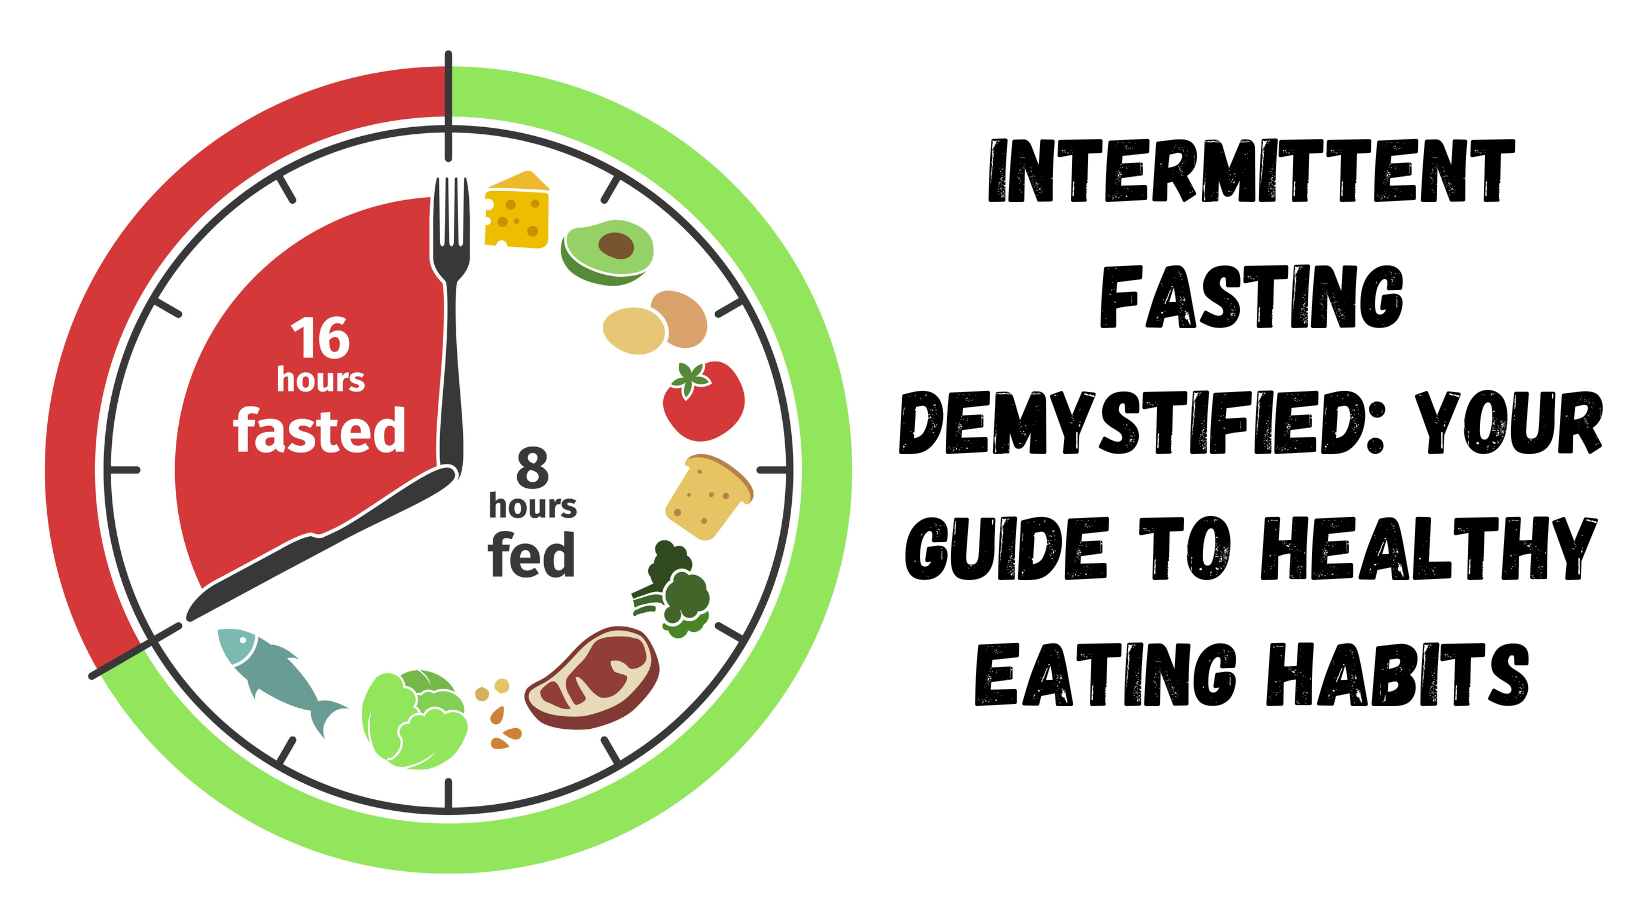 Intermittent Fasting Demystified Your Guide to Healthy Eating Habits